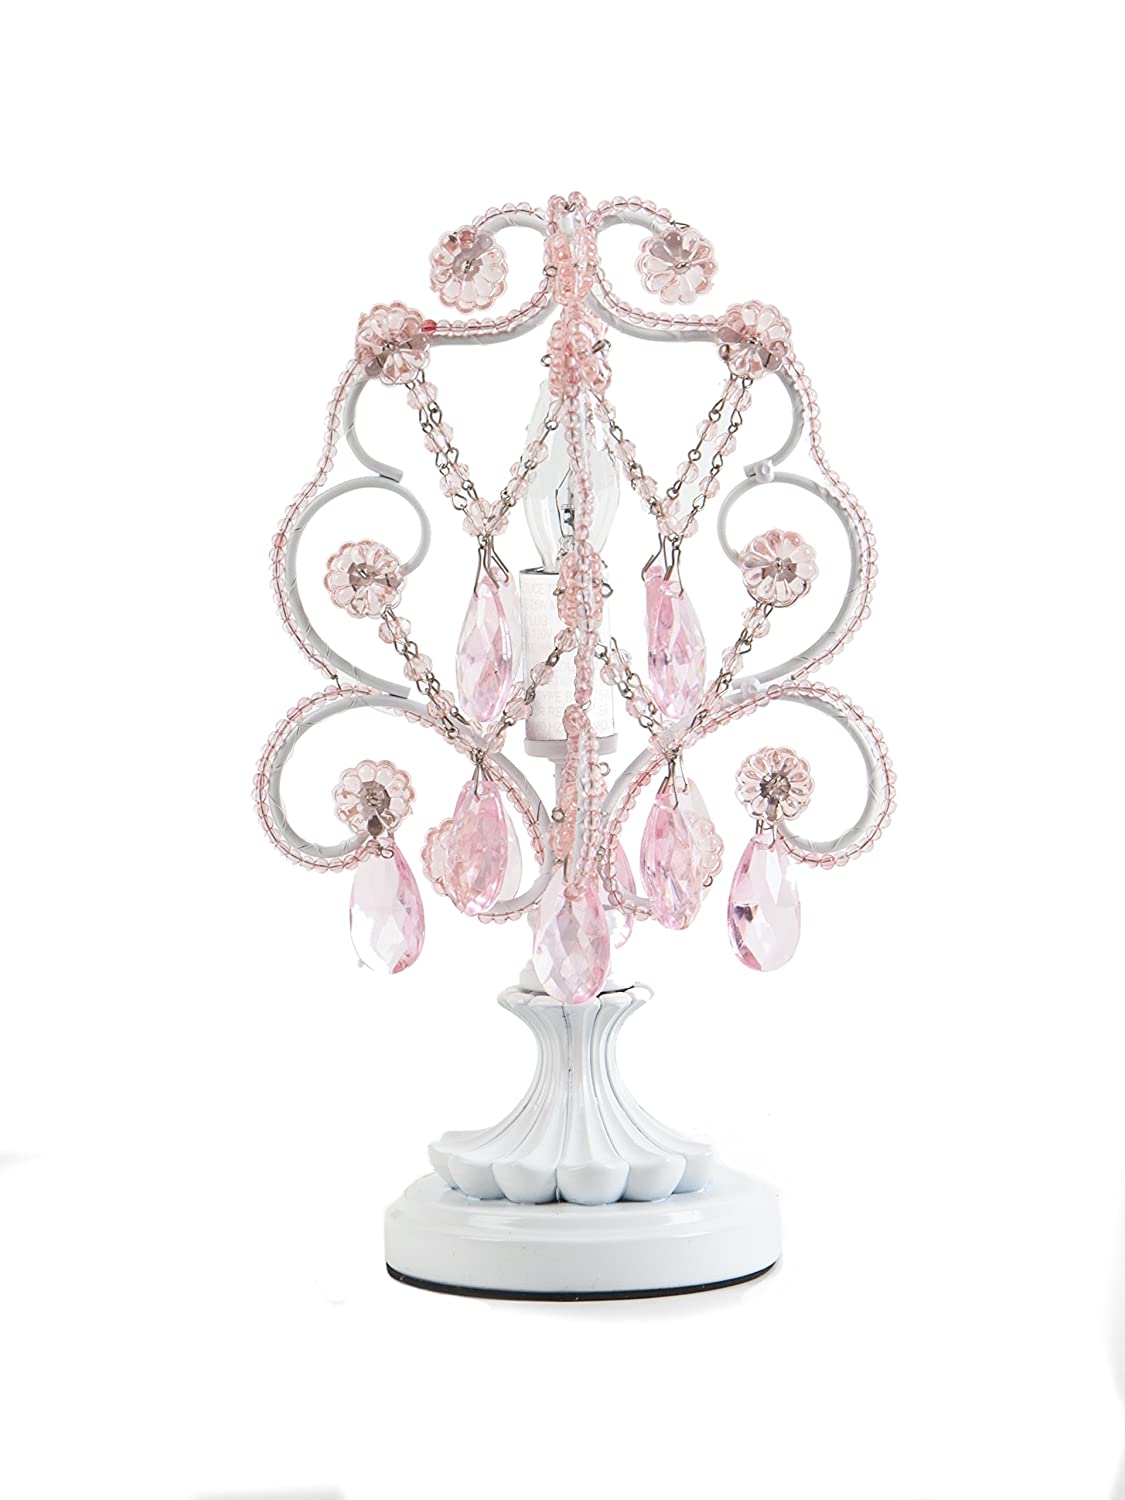 Tadpoles Chandelier Mini Table Lamp, Pink - image 1 of 5